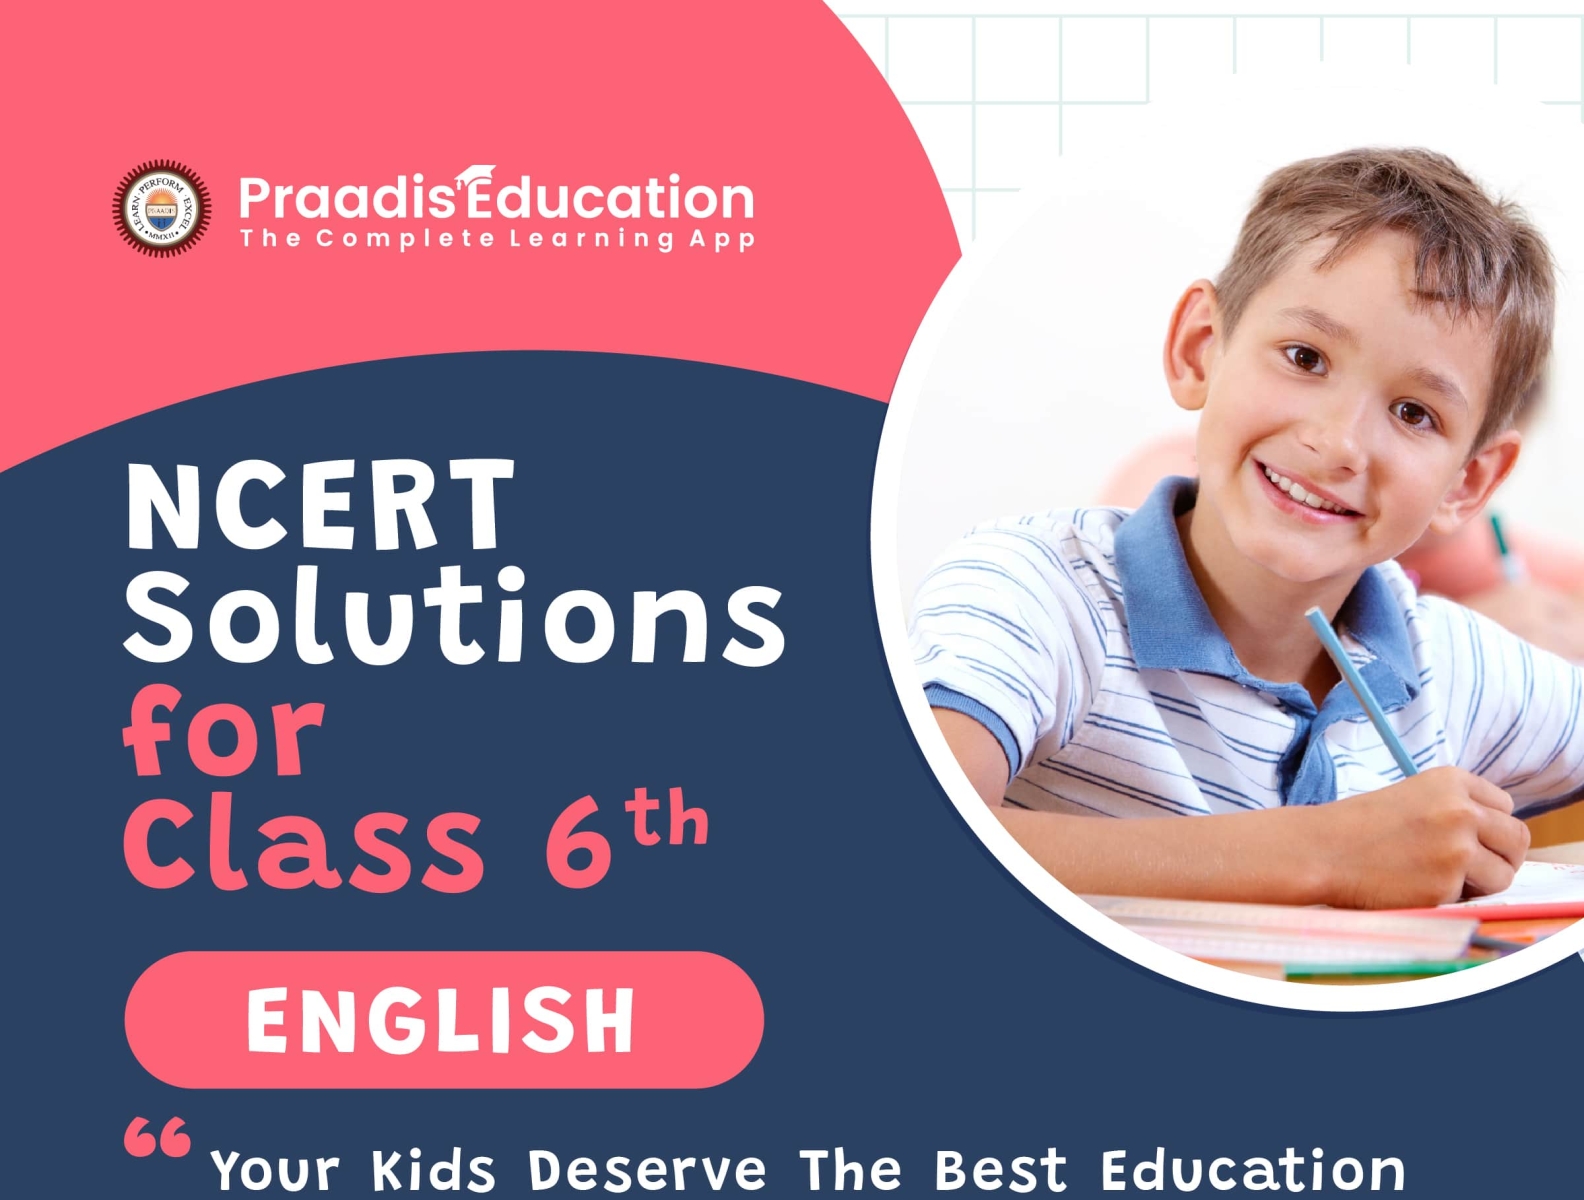 NCERT Solutions for Class 6 English Free PDF Download by Praadis Education  on Dribbble